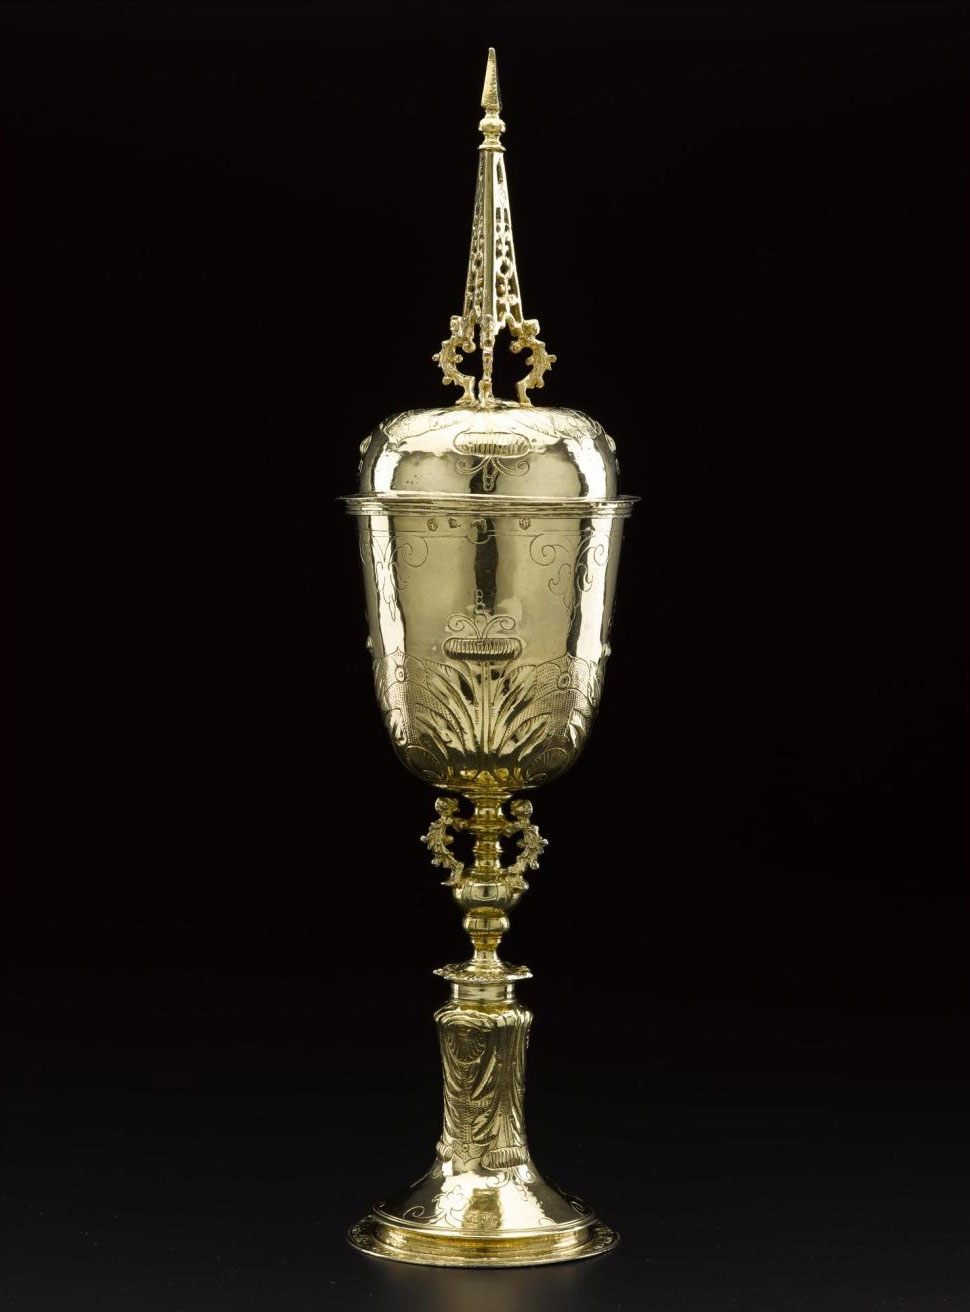 Silver-gilt steeple cup, made in London 1626-27 and signed with the initials CB. You can see this cup in the Art of Living gallery in the National Museum of Scotland.